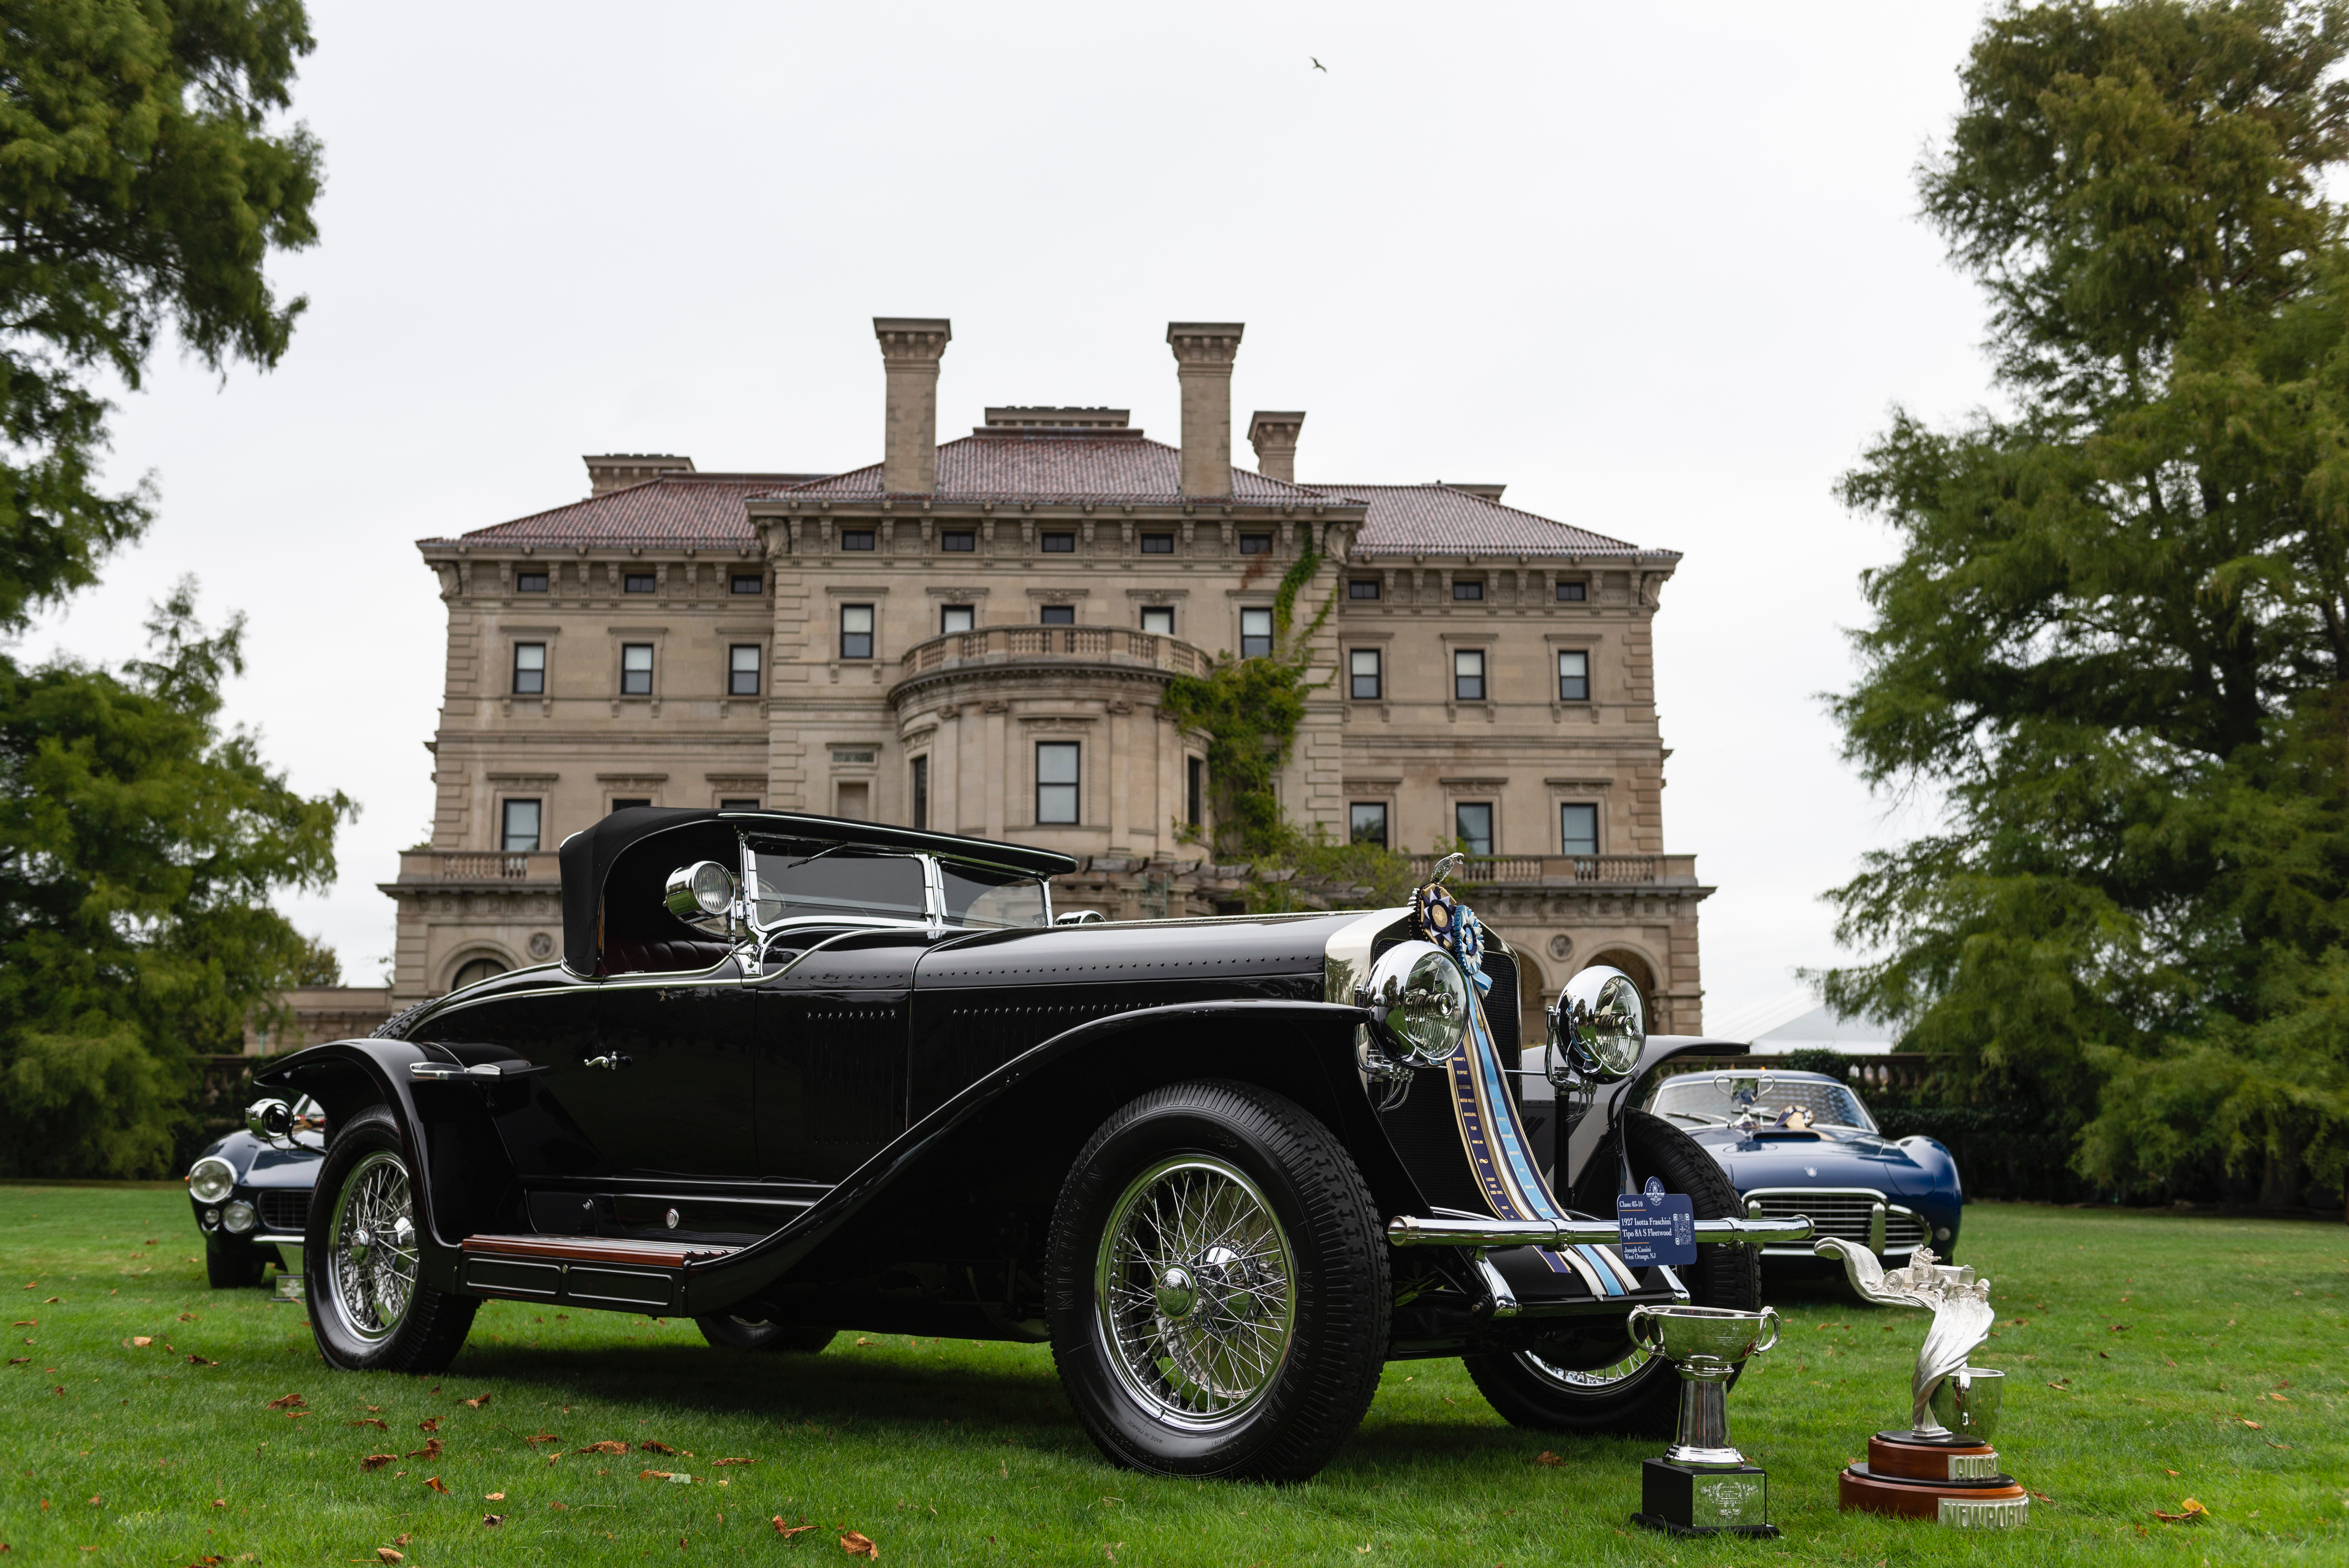 Newport concours, Gatsbyan setting greets inaugural Newport concours, ClassicCars.com Journal